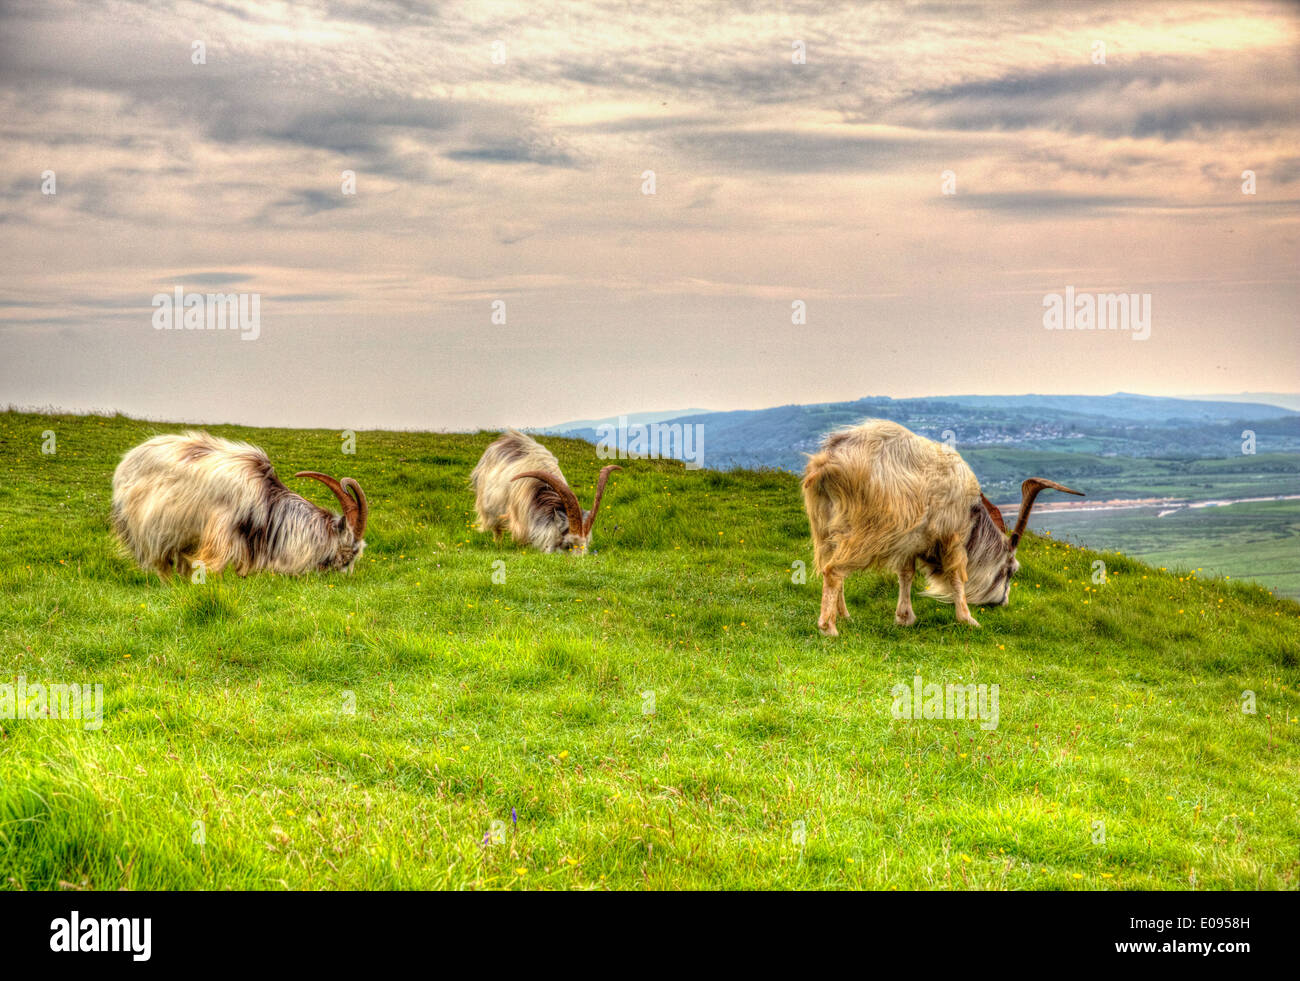 British Primitive goat breed with large horns and beard white grey and black on hilltop in HDR Stock Photo